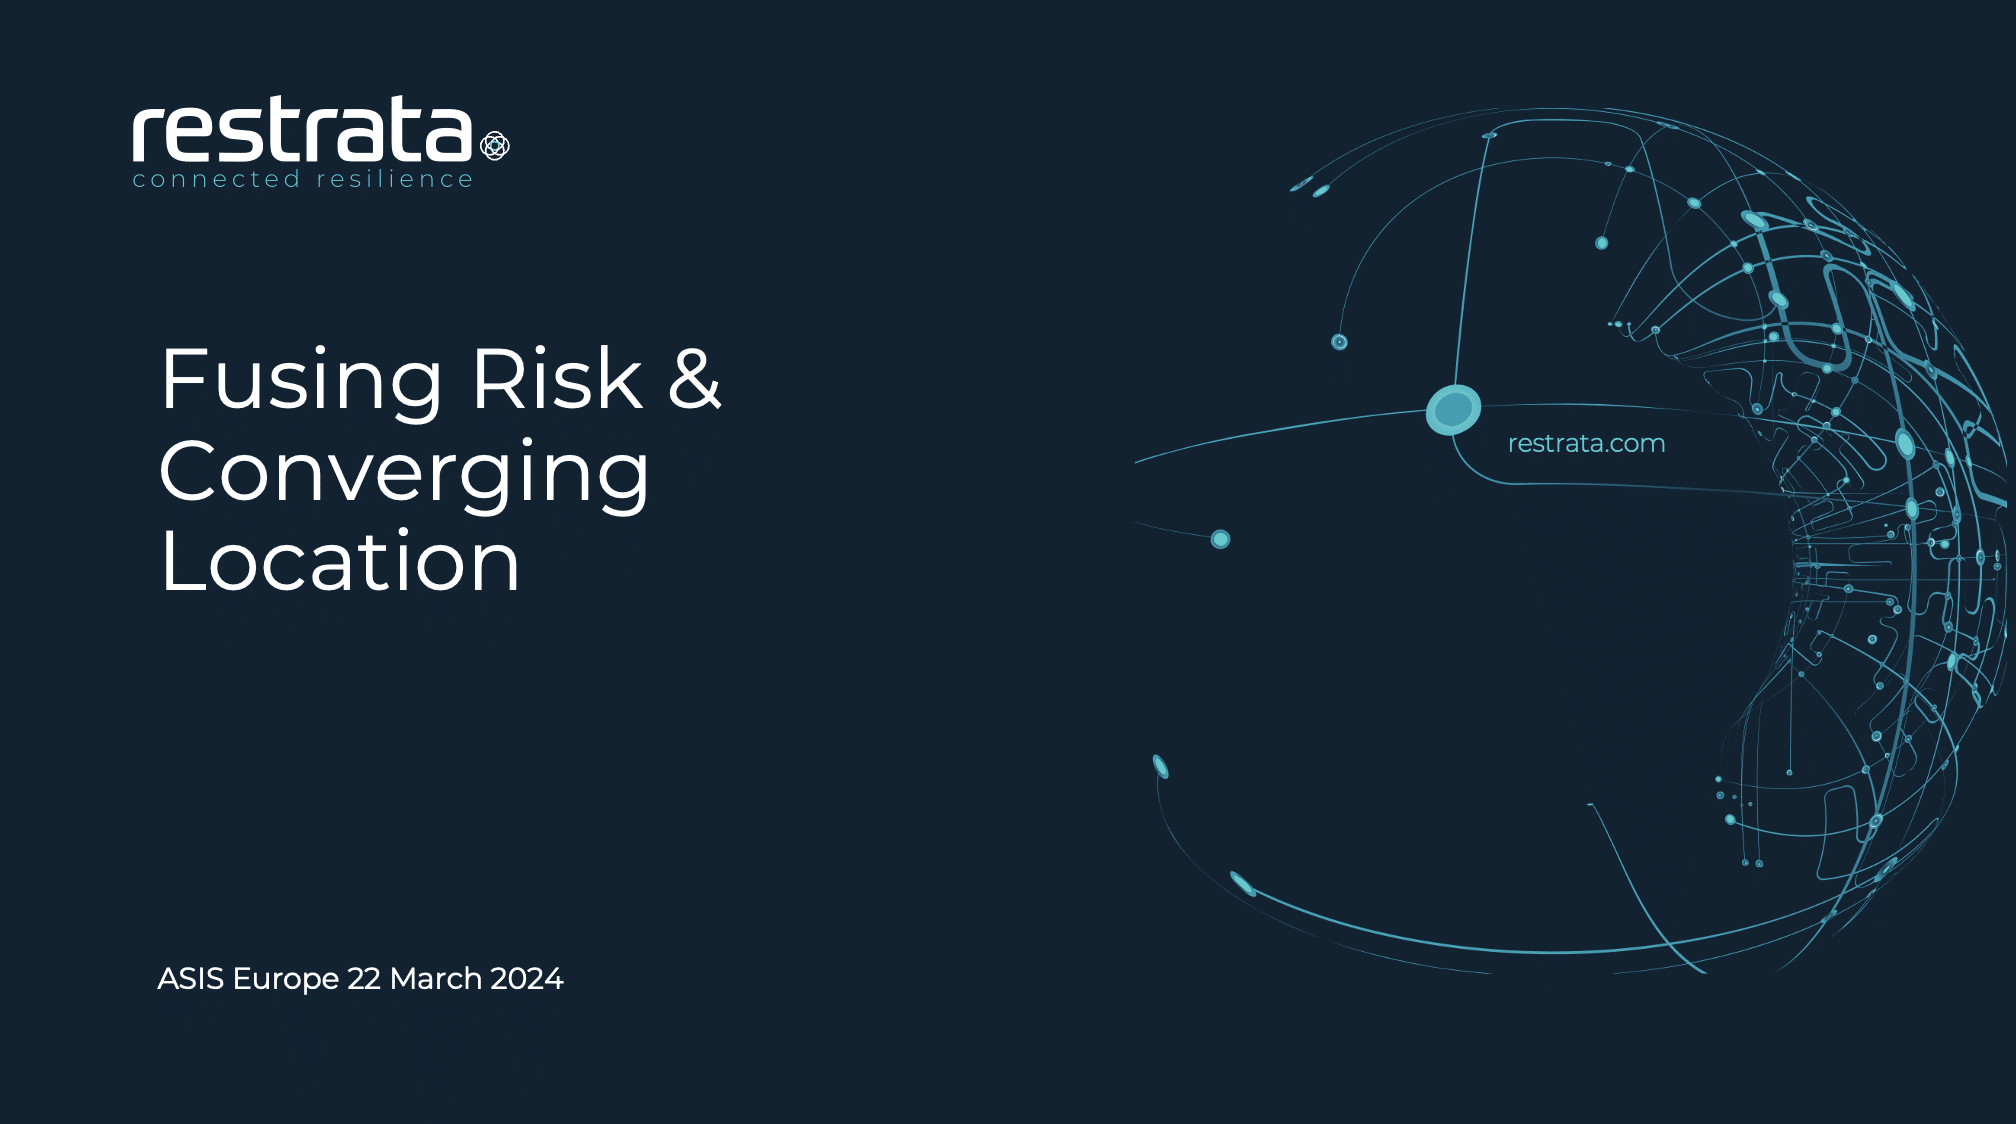 fusing risk and converging location - ASIS presentation